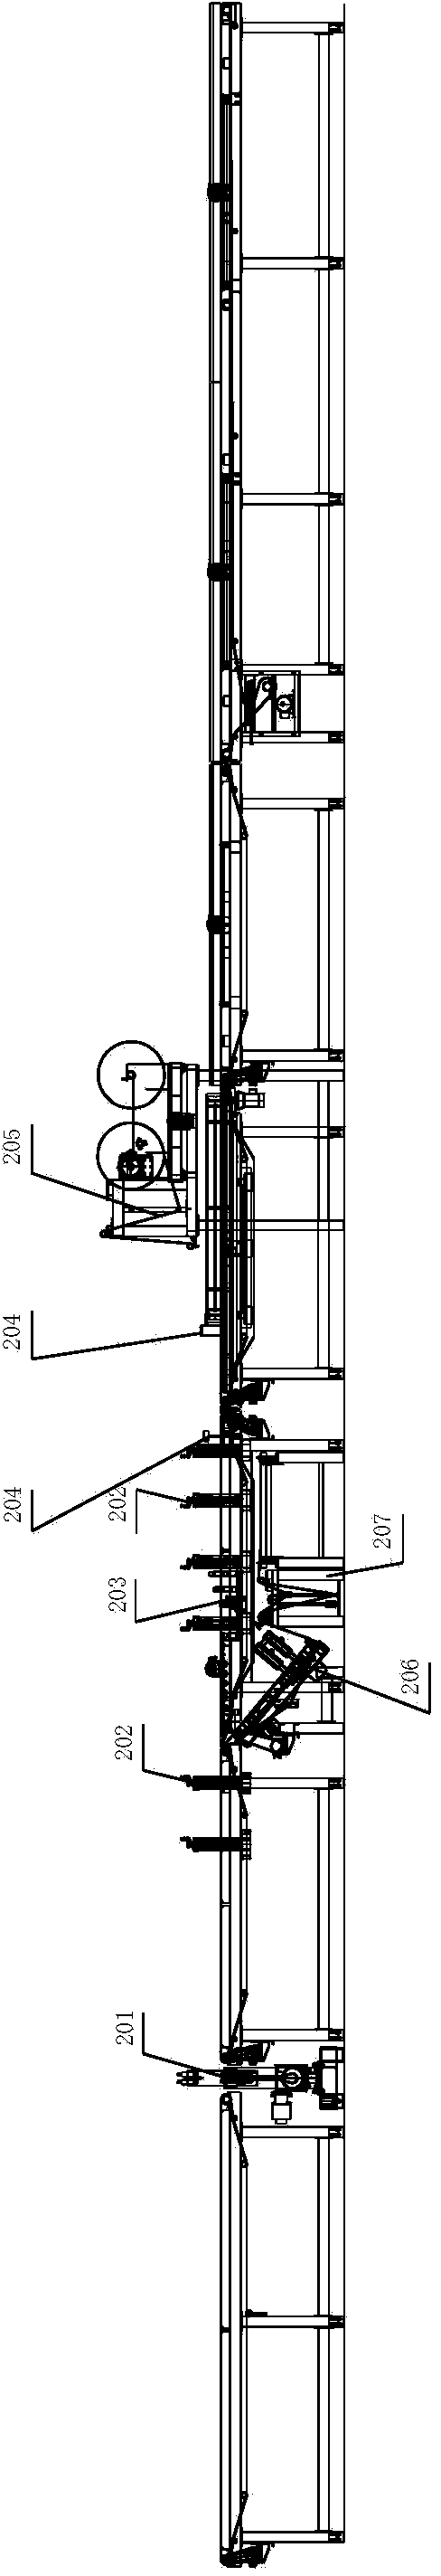 Glass wool product packaging production line and glass wool product packaging method